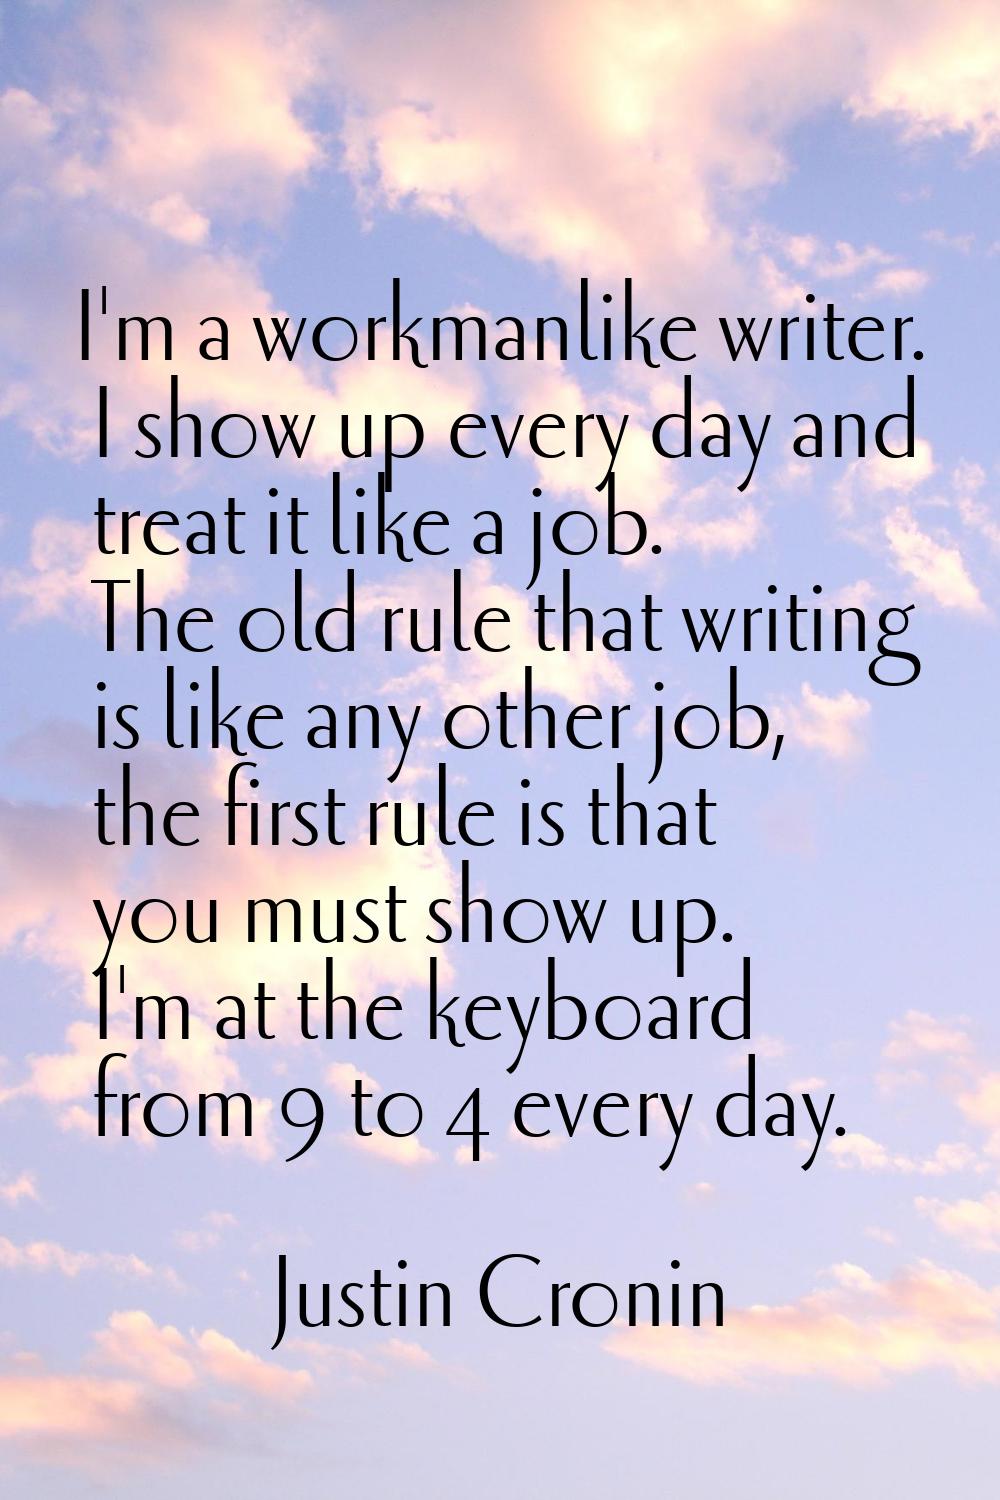 I'm a workmanlike writer. I show up every day and treat it like a job. The old rule that writing is